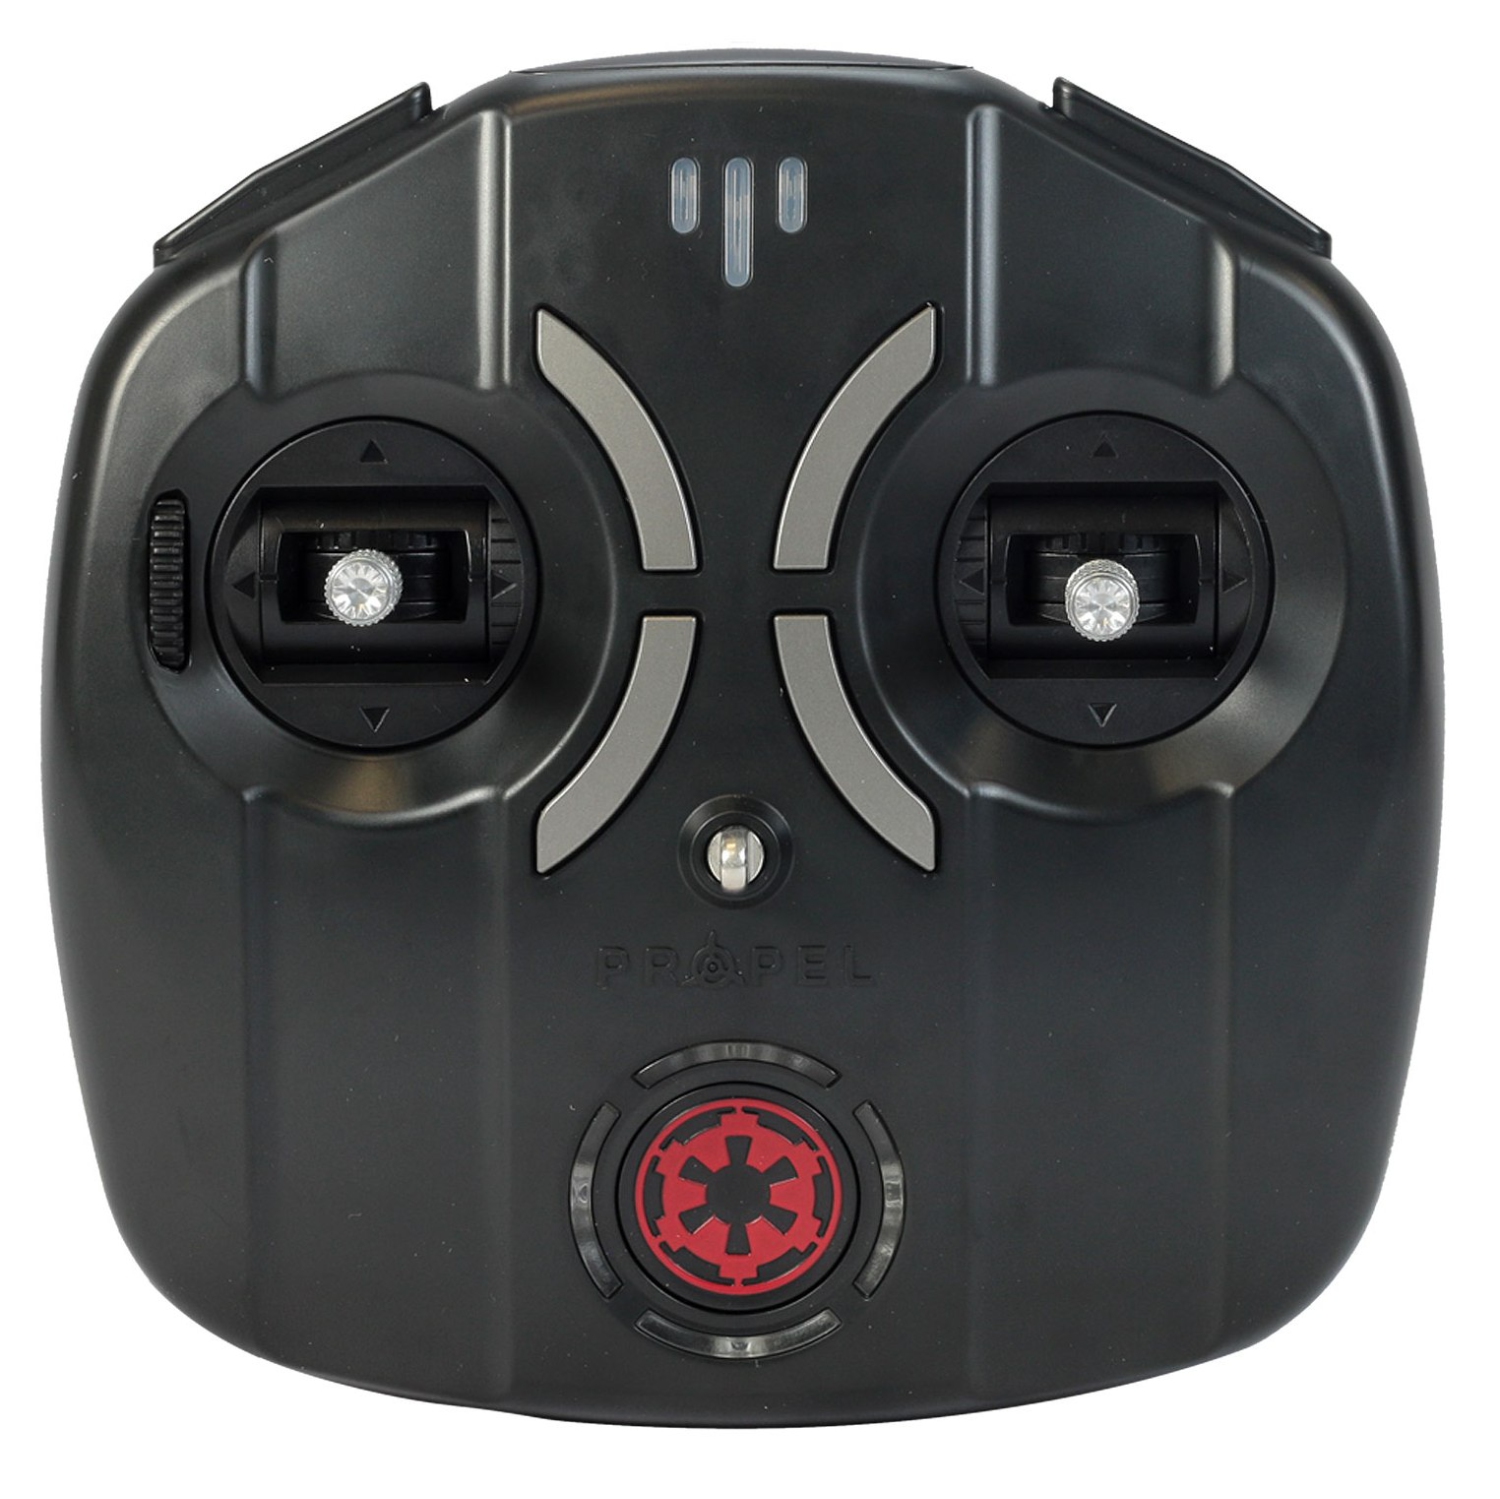 Propel Star Wars Tie Advanced X1 Drone Remote Controller w/Phone Holder- Refurbished Excellent